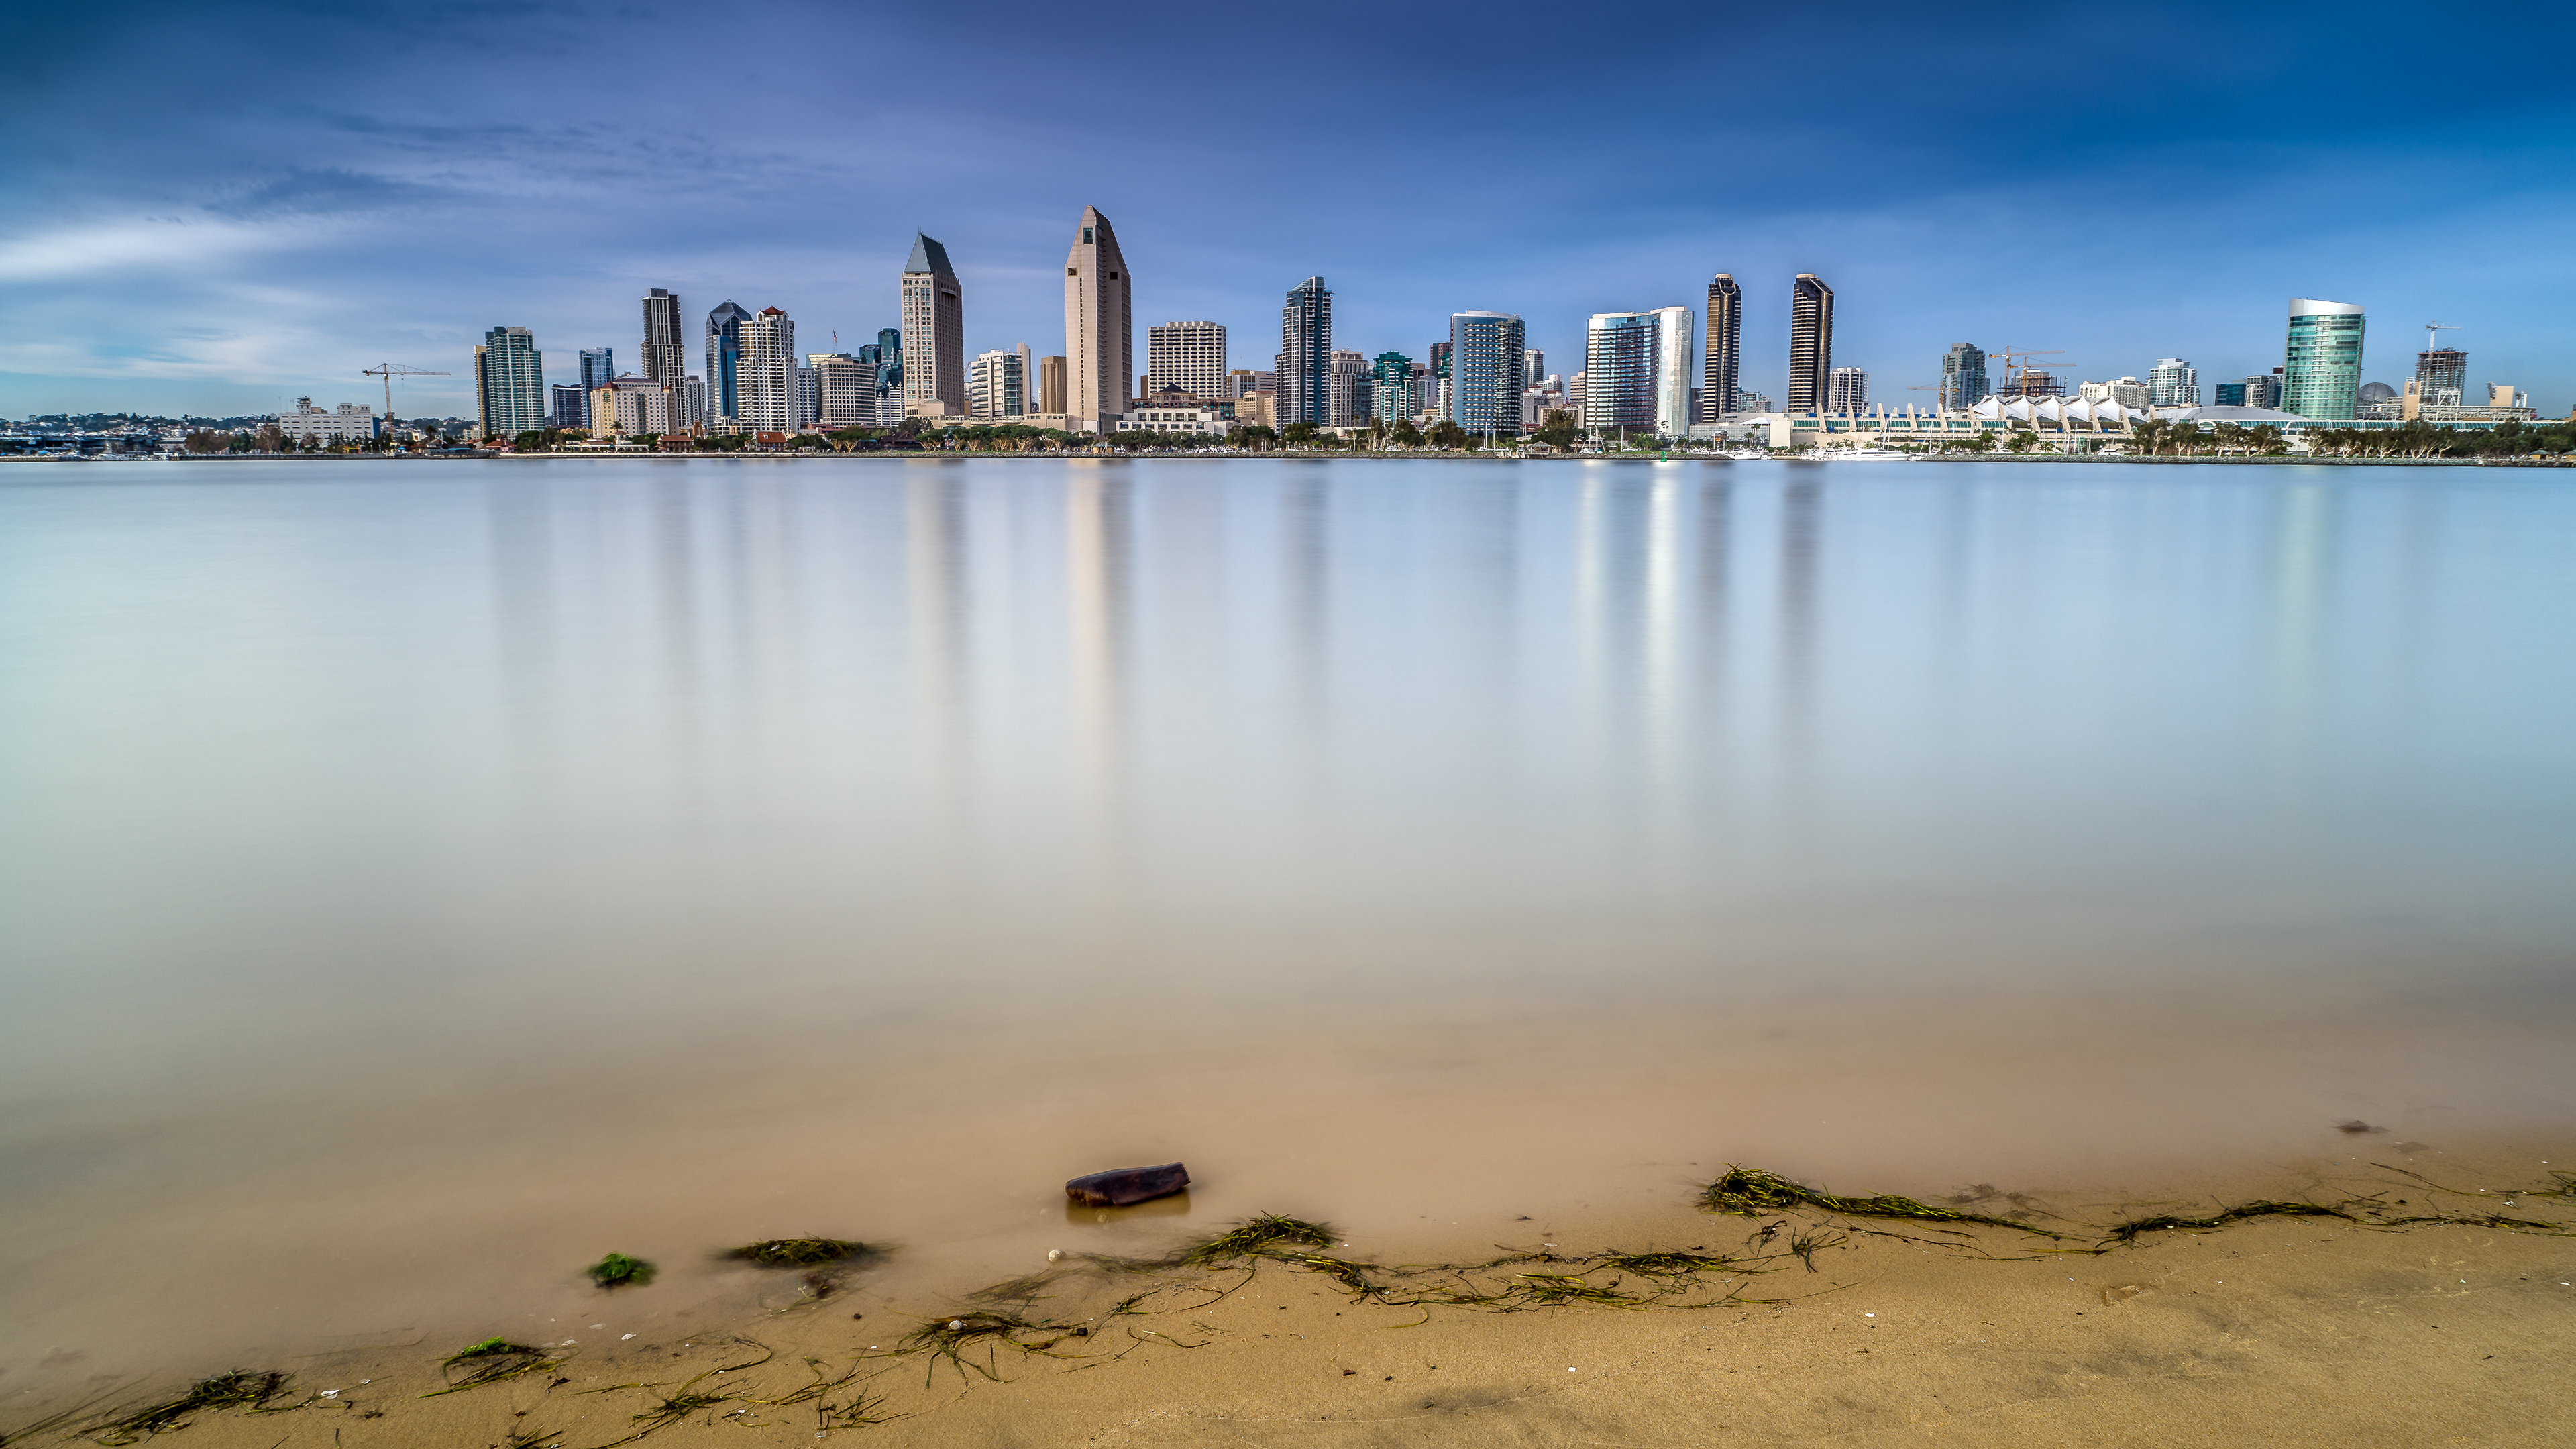 man made, san diego, reflection, water, cities